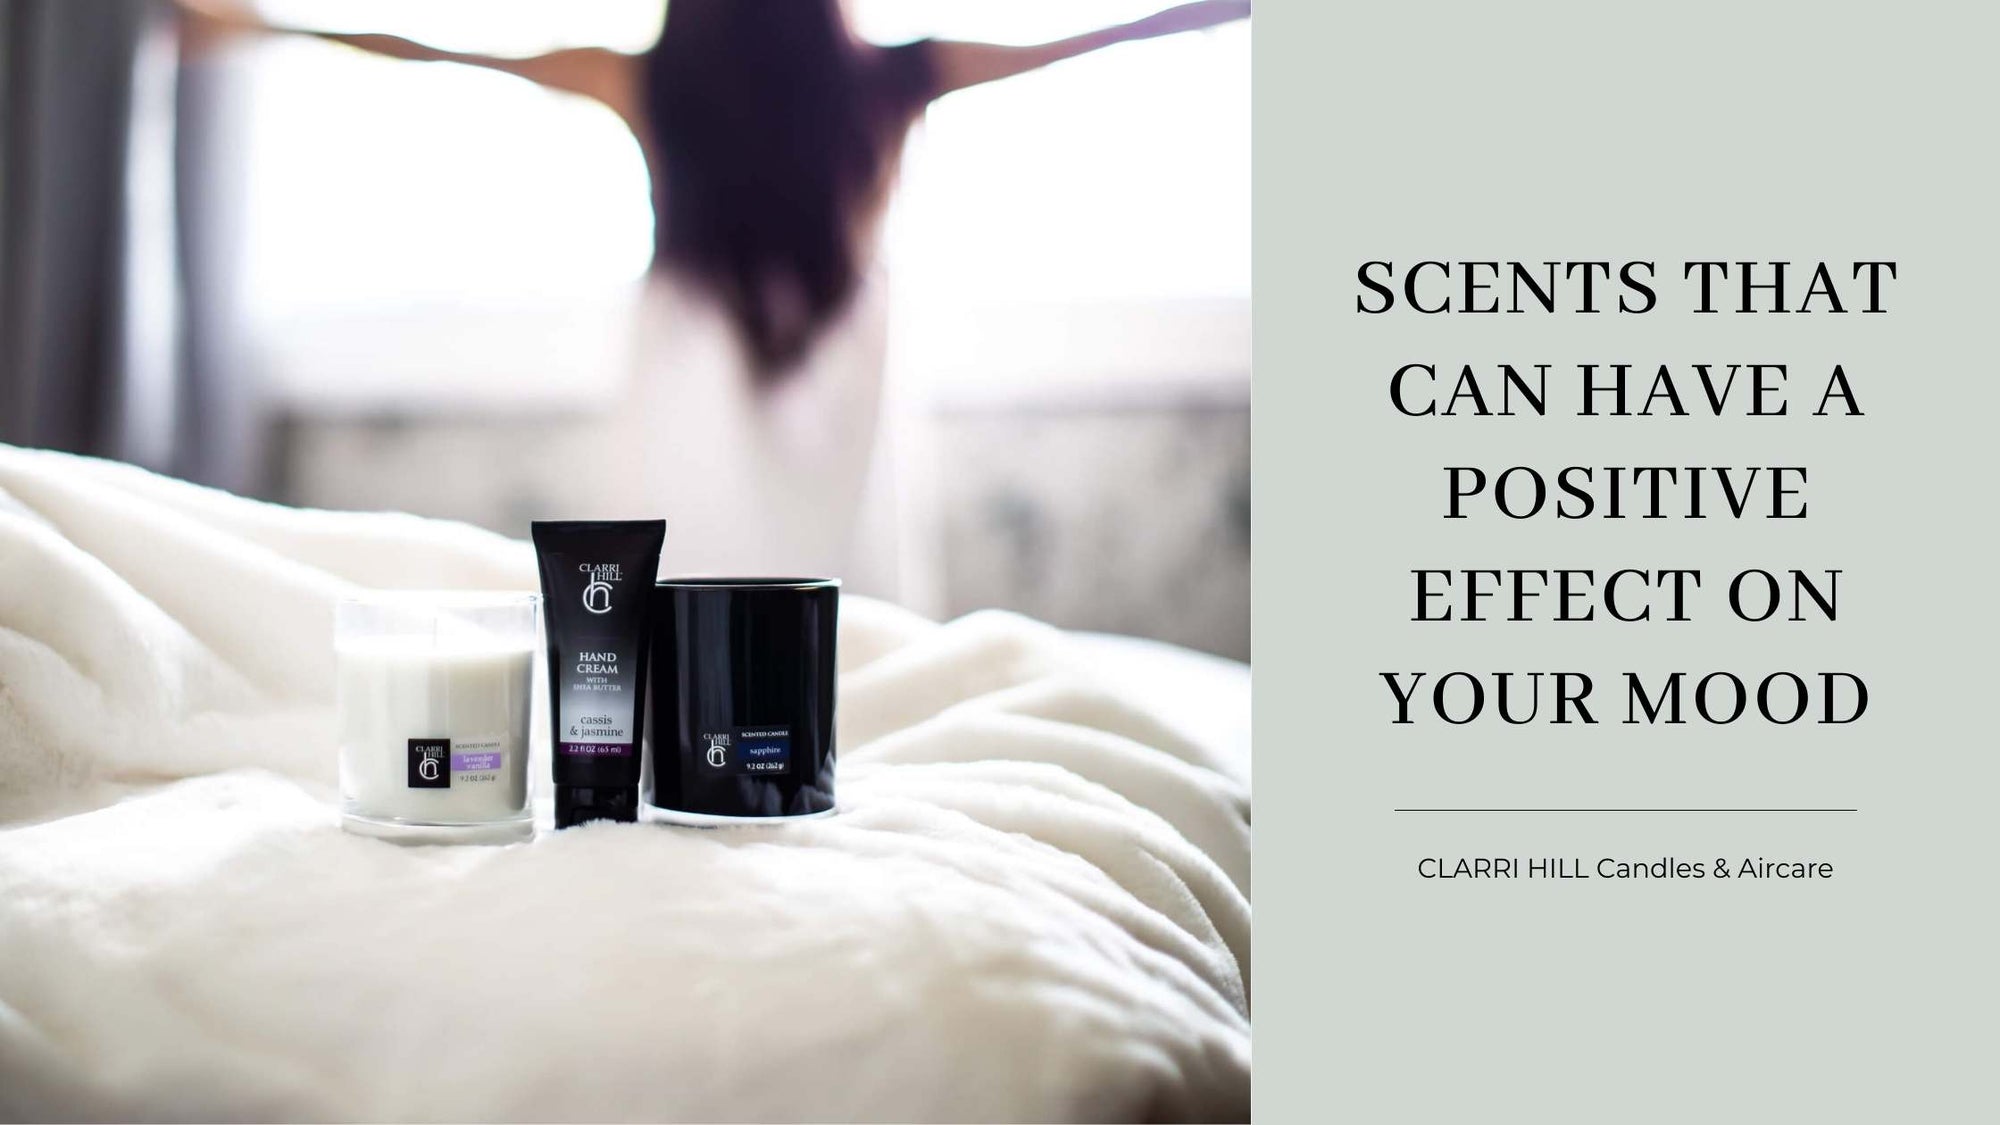 Scents That Can Have a Positive Effect on Your Mood | Clarri Hill